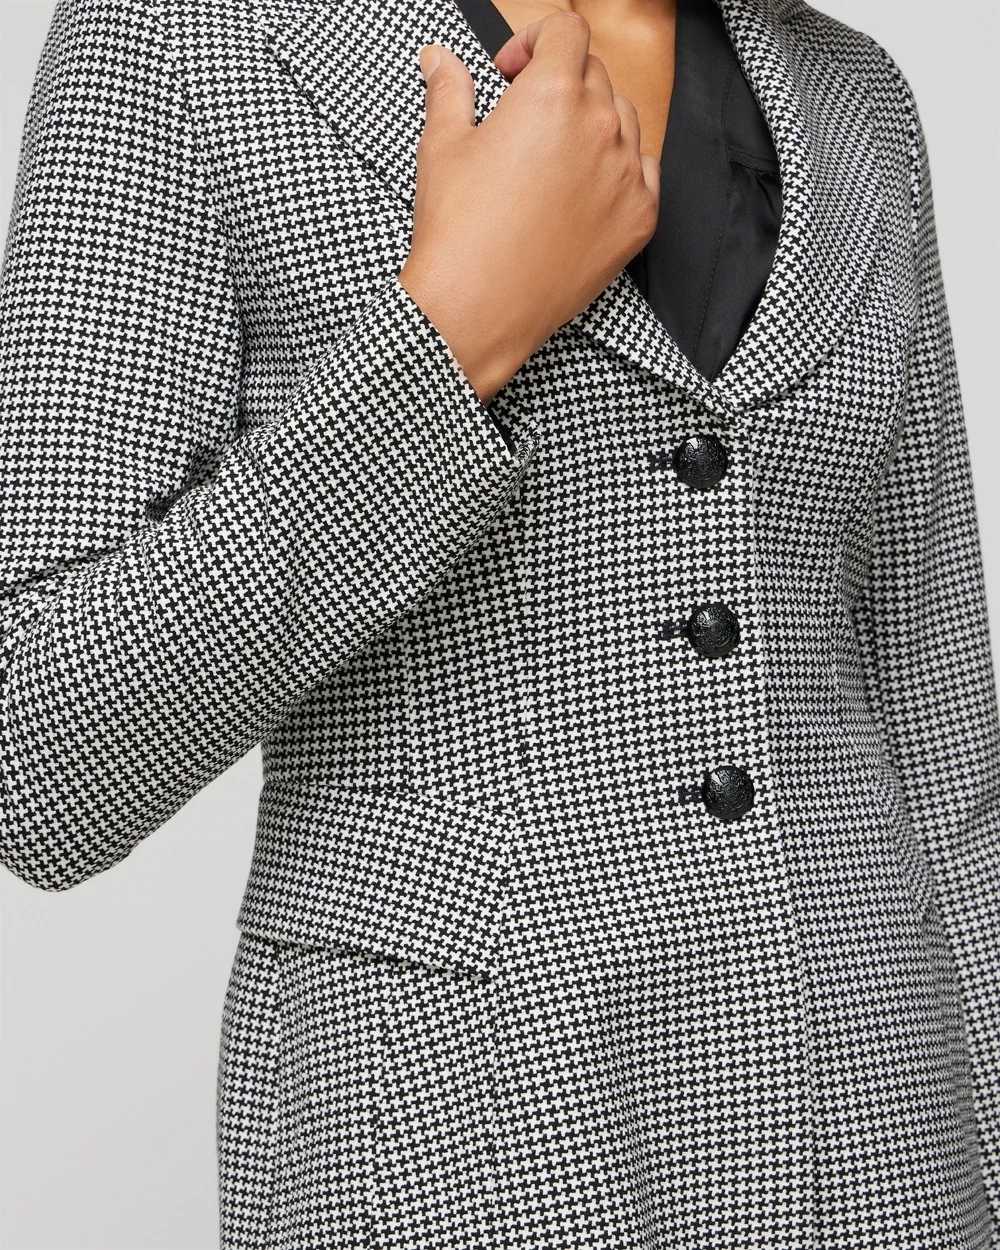 Petite WHBM® Houndstooth Signature Jacket click to view larger image.